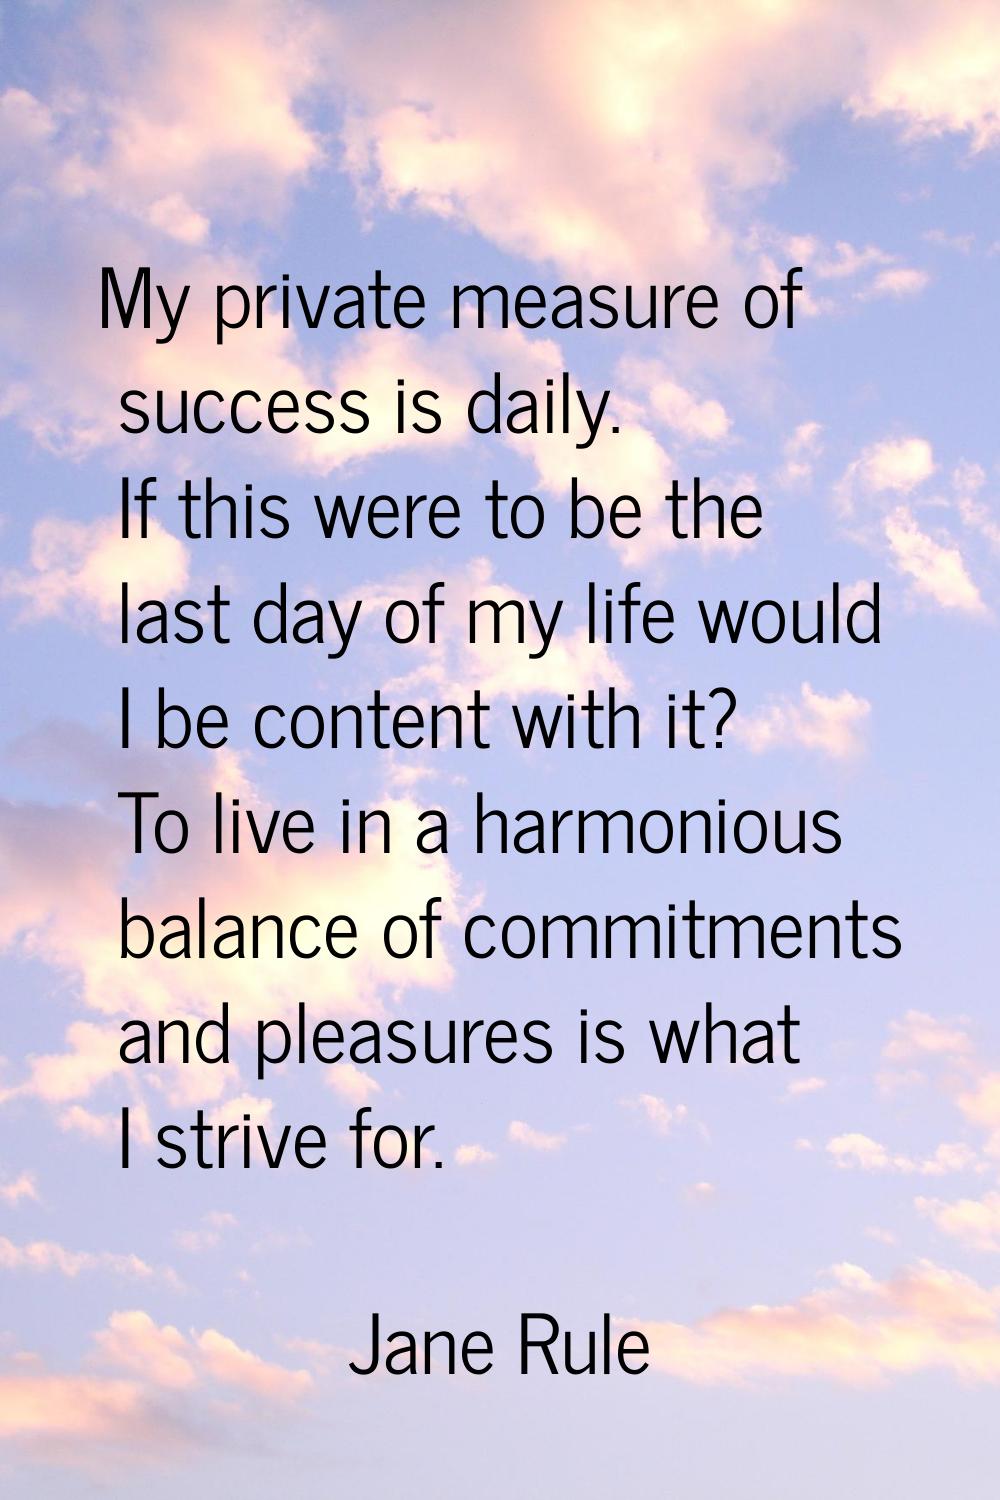 My private measure of success is daily. If this were to be the last day of my life would I be conte